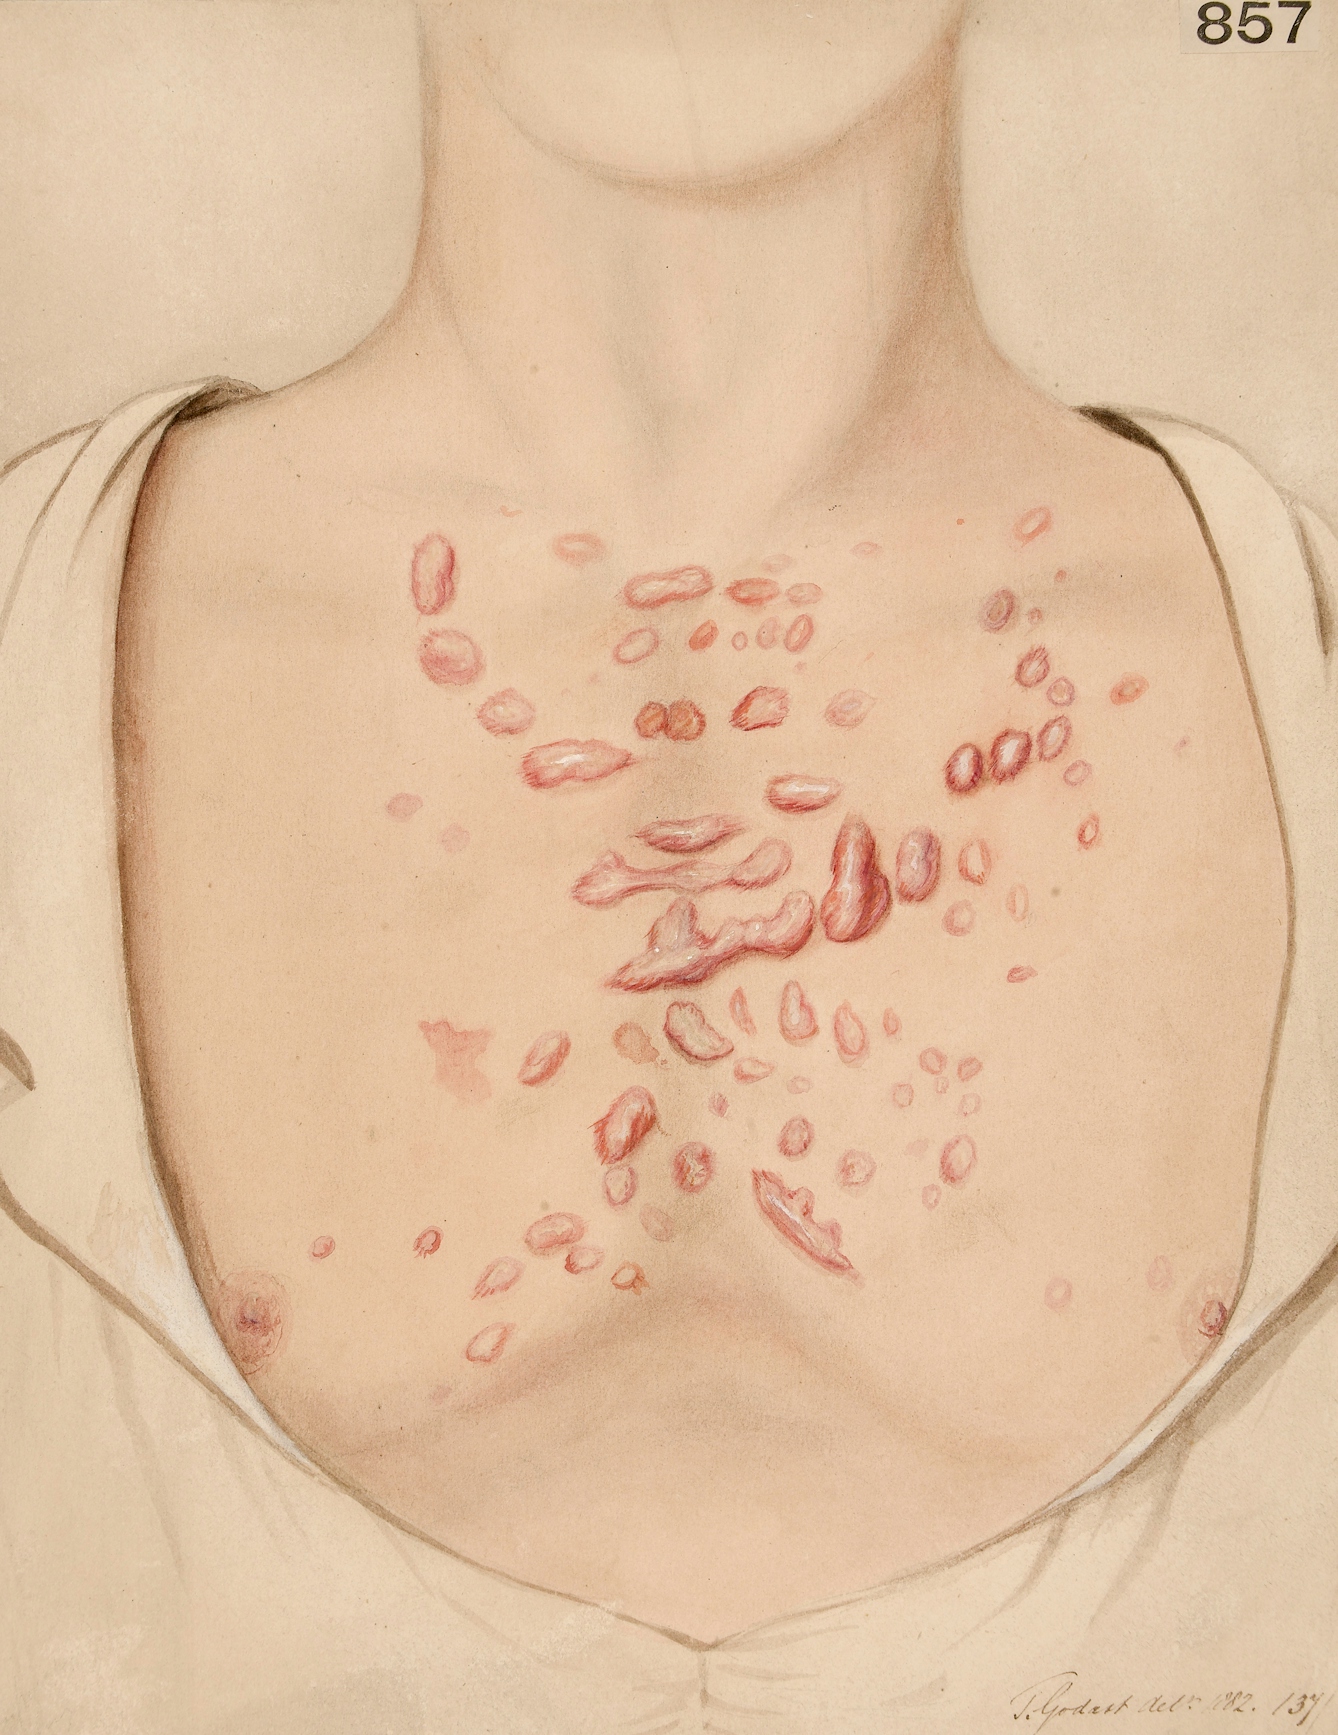 Photograph of an illustration of a man's chest showing red acne keloids.